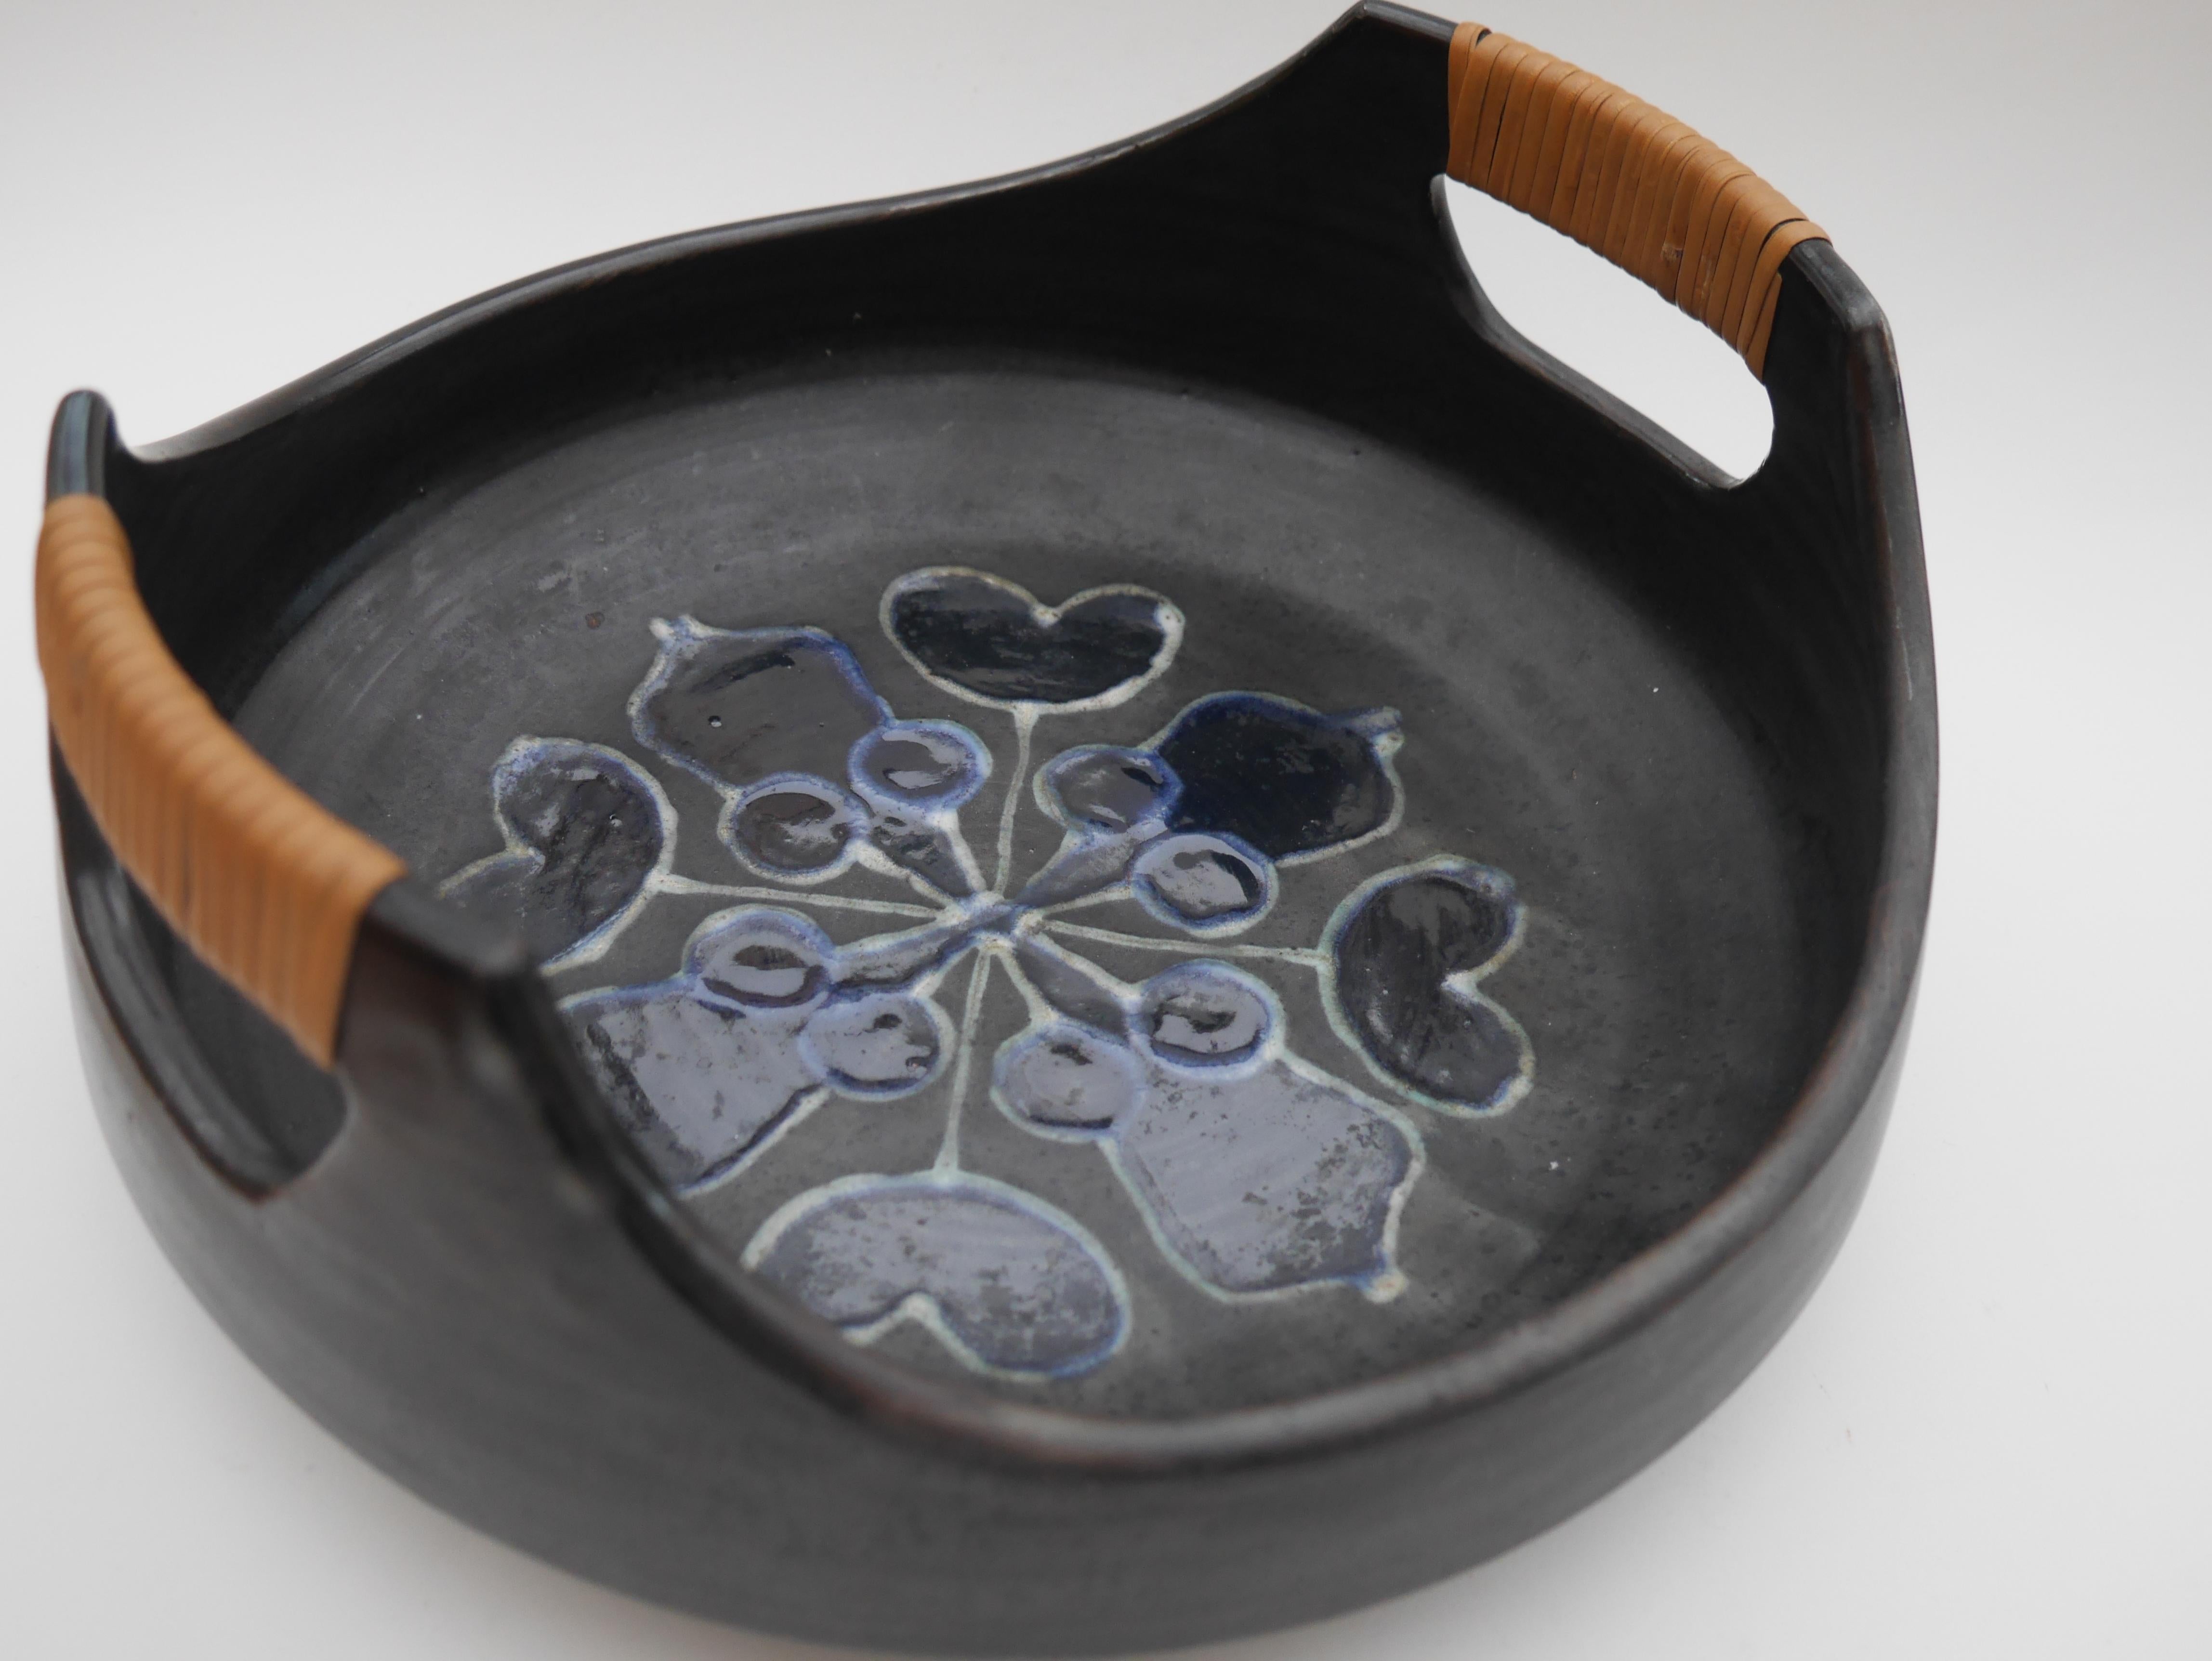 A stunning large, black bowl with handles, made by Thomas Hellström for Nittsjö, Sweden, marked 